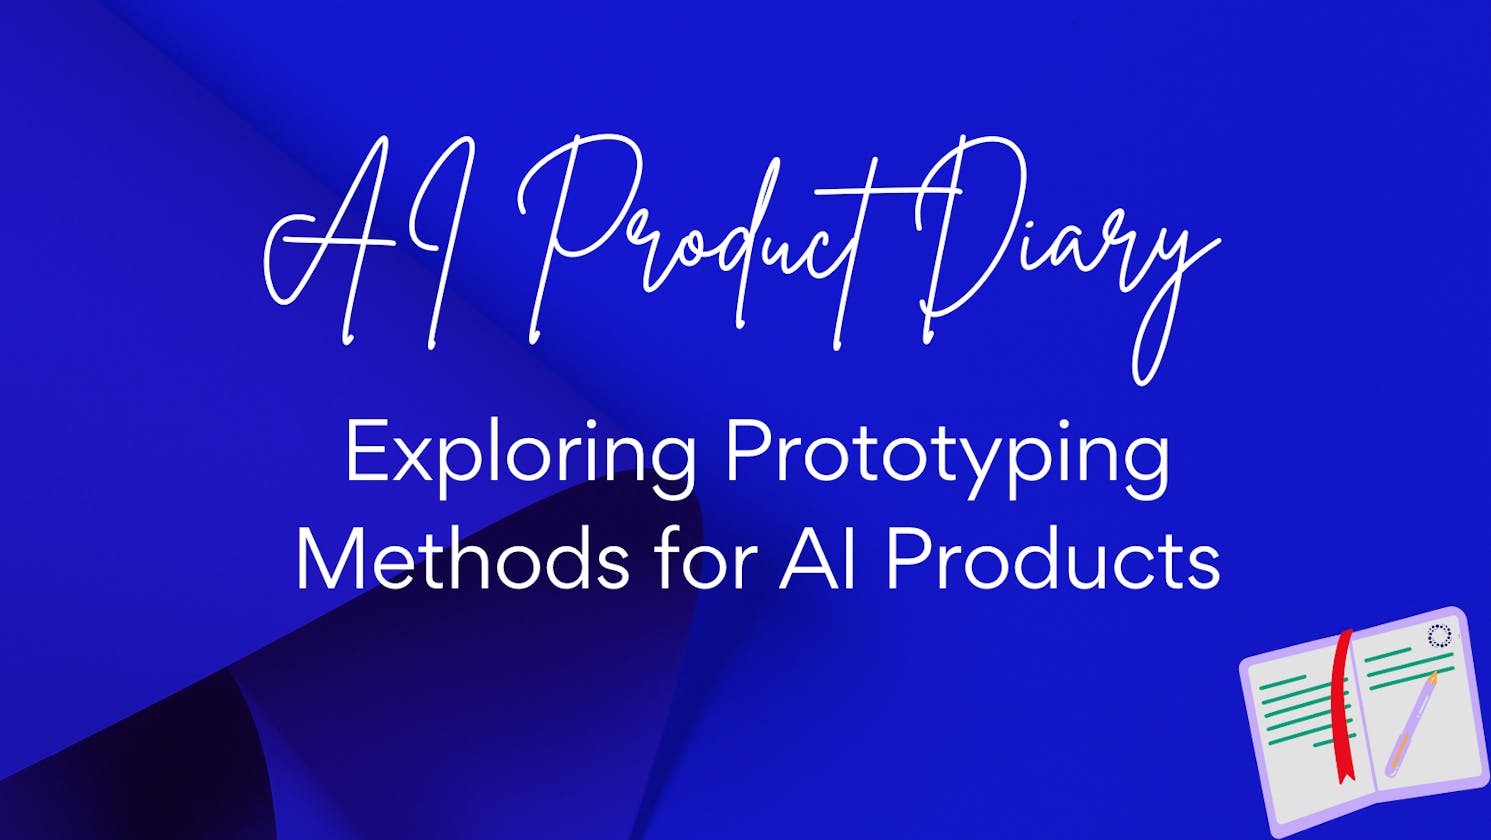 Exploring Prototyping Methods for AI Products: From Wireframes to Functional Models